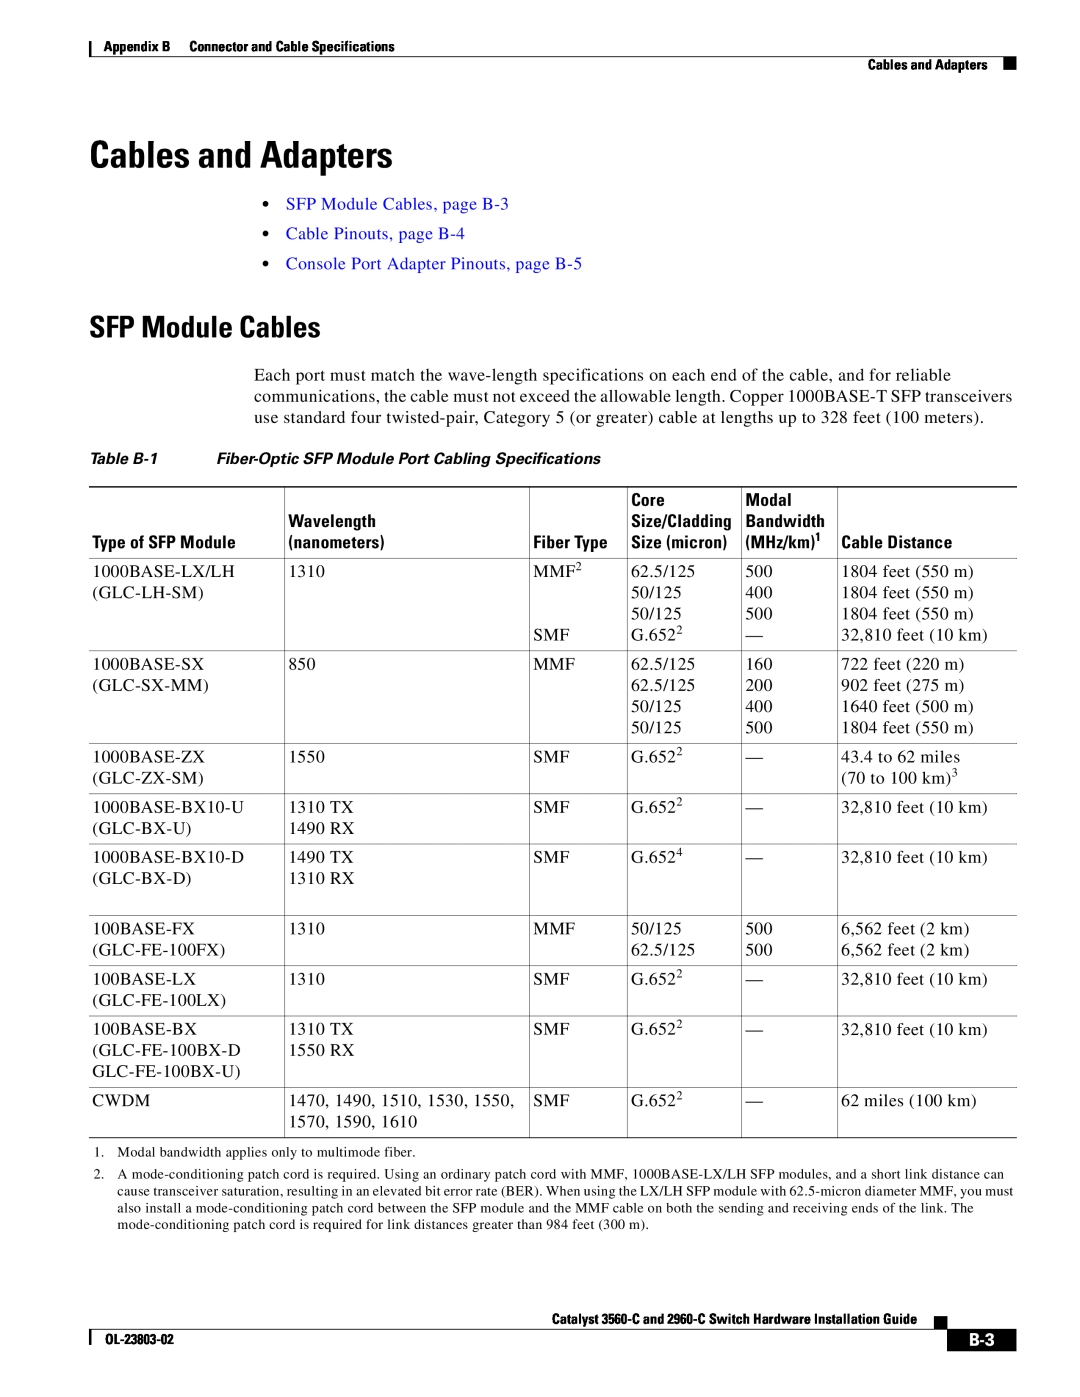 Cisco Systems 3560-C Cables and Adapters, SFP Module Cables, page B-3 Cable Pinouts, page B-4, Core, Modal, Wavelength 